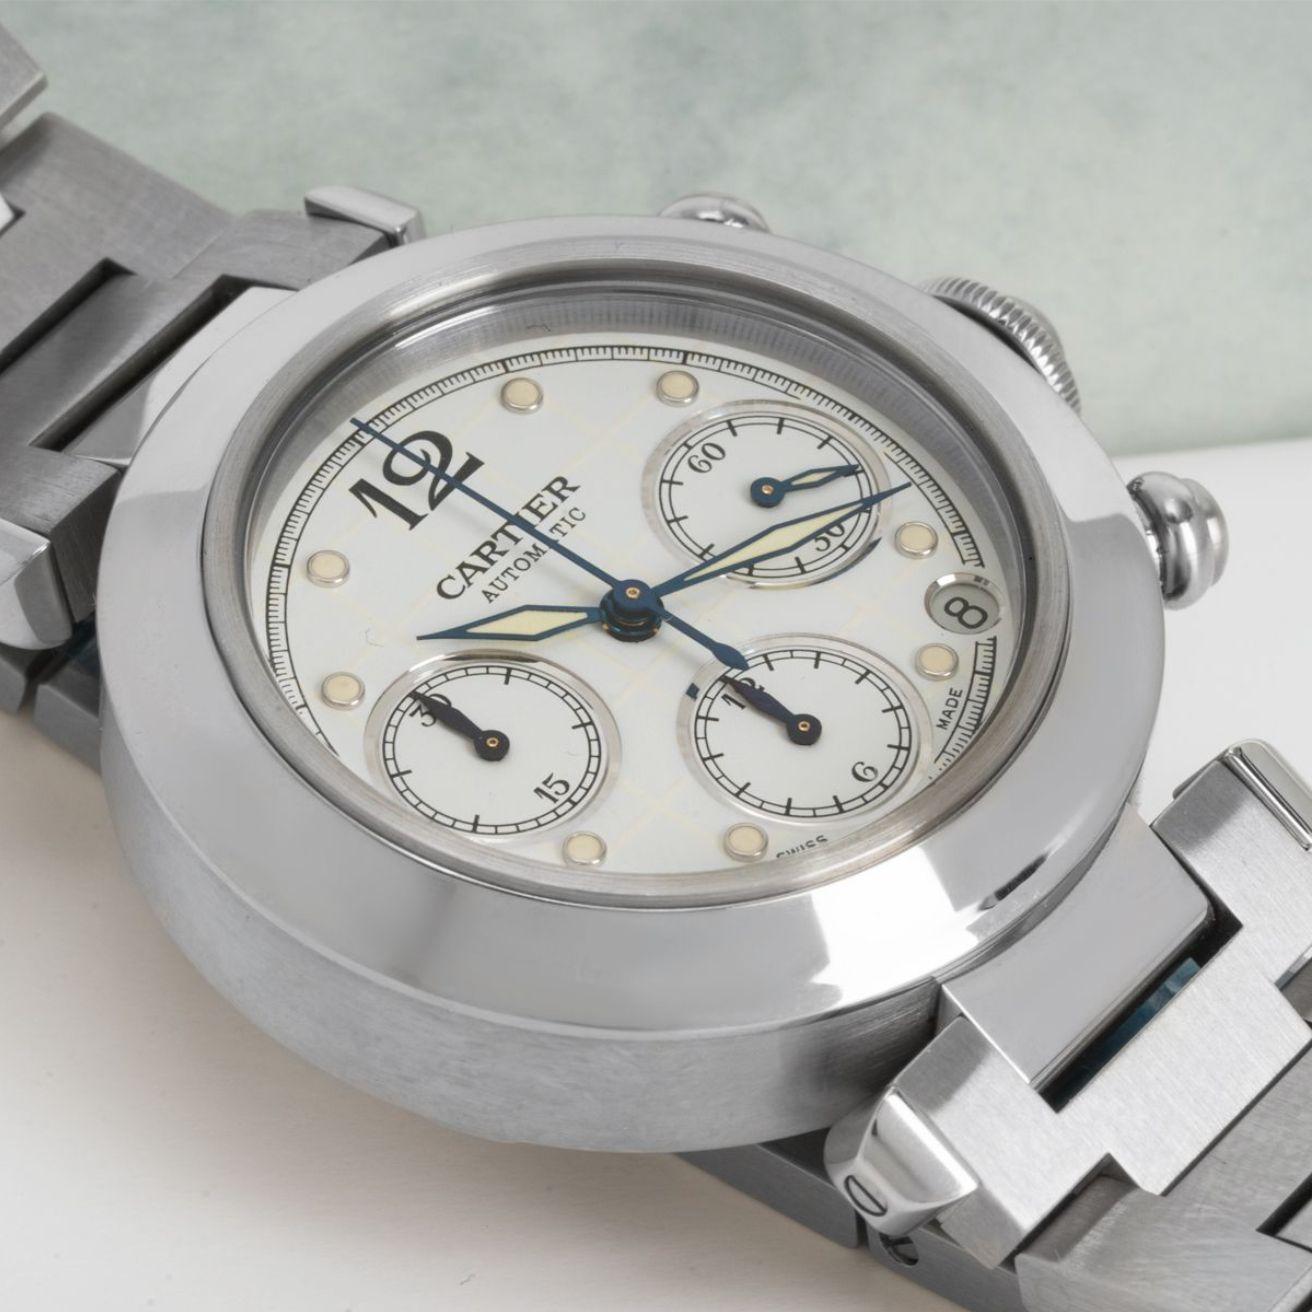 A NOS stainless steel Pasha Chronograph wristwatch by Cartier. Features a white dial with a date aperture, 3 chronograph counters and a stainless steel bezel as well as a crown cover and chronograph pushers.

Fitted with a sapphire glass, an